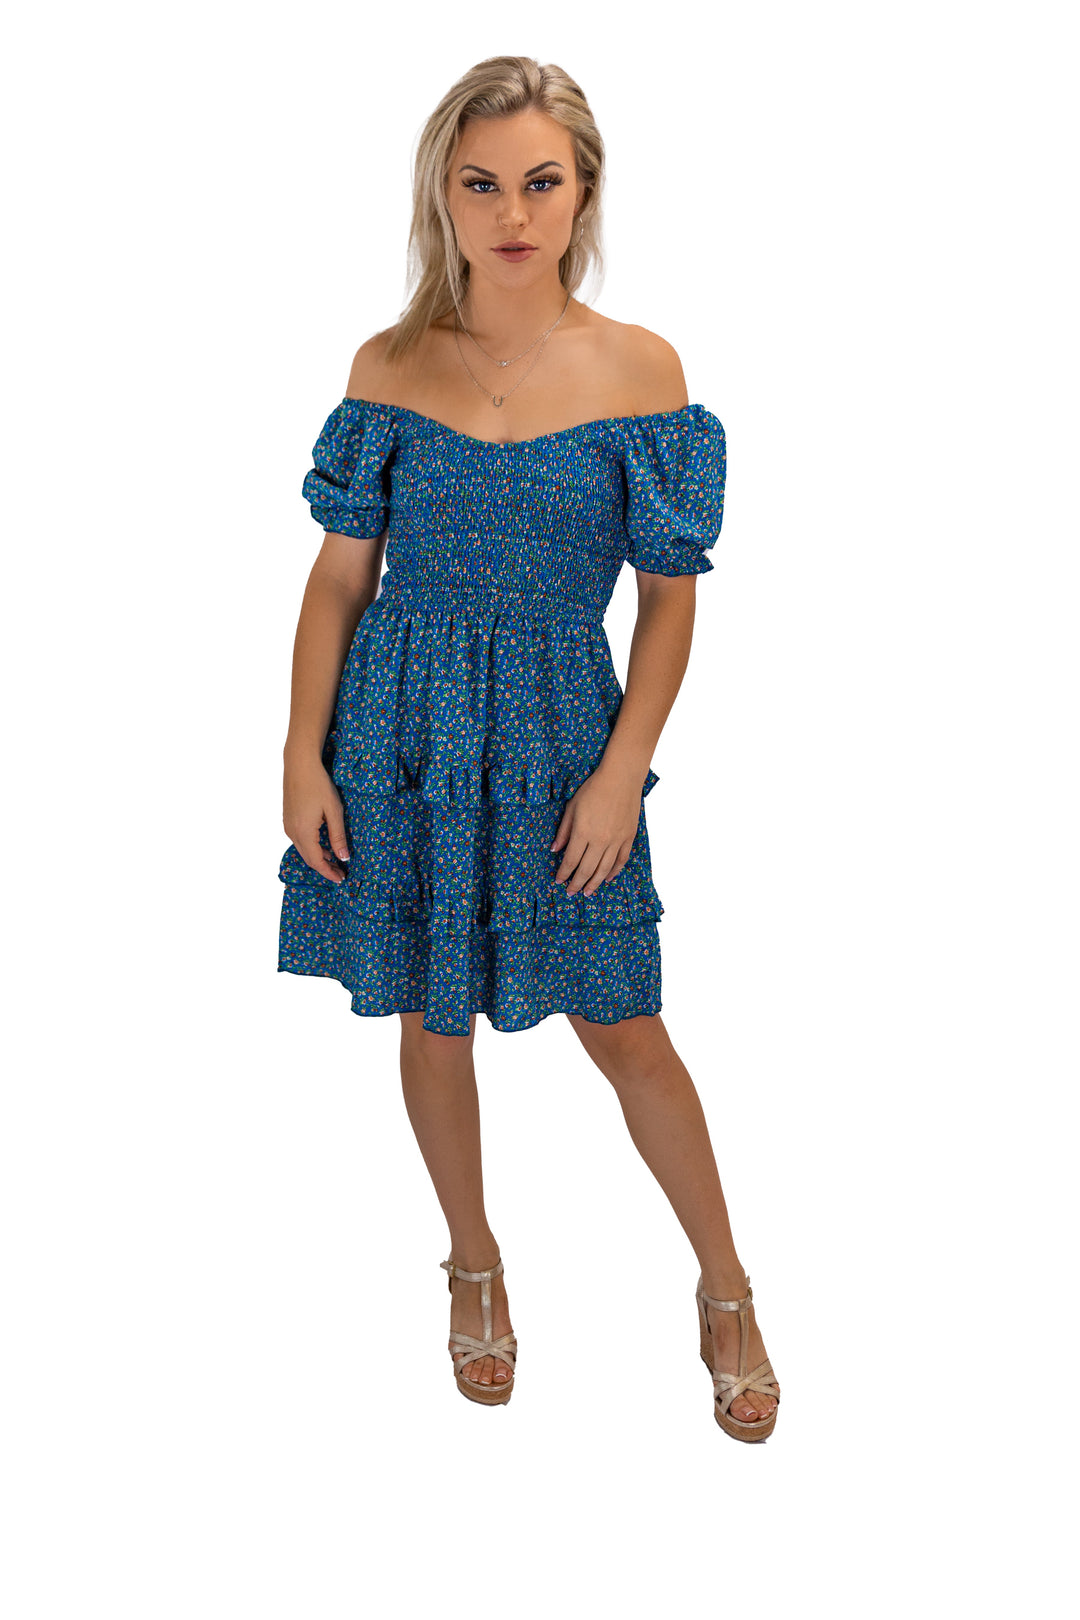 Fabonics Breezy Blooms Blue Off-Shoulder Ruffle Dress with Floral Print, Ideal for Day to Evening Elegance